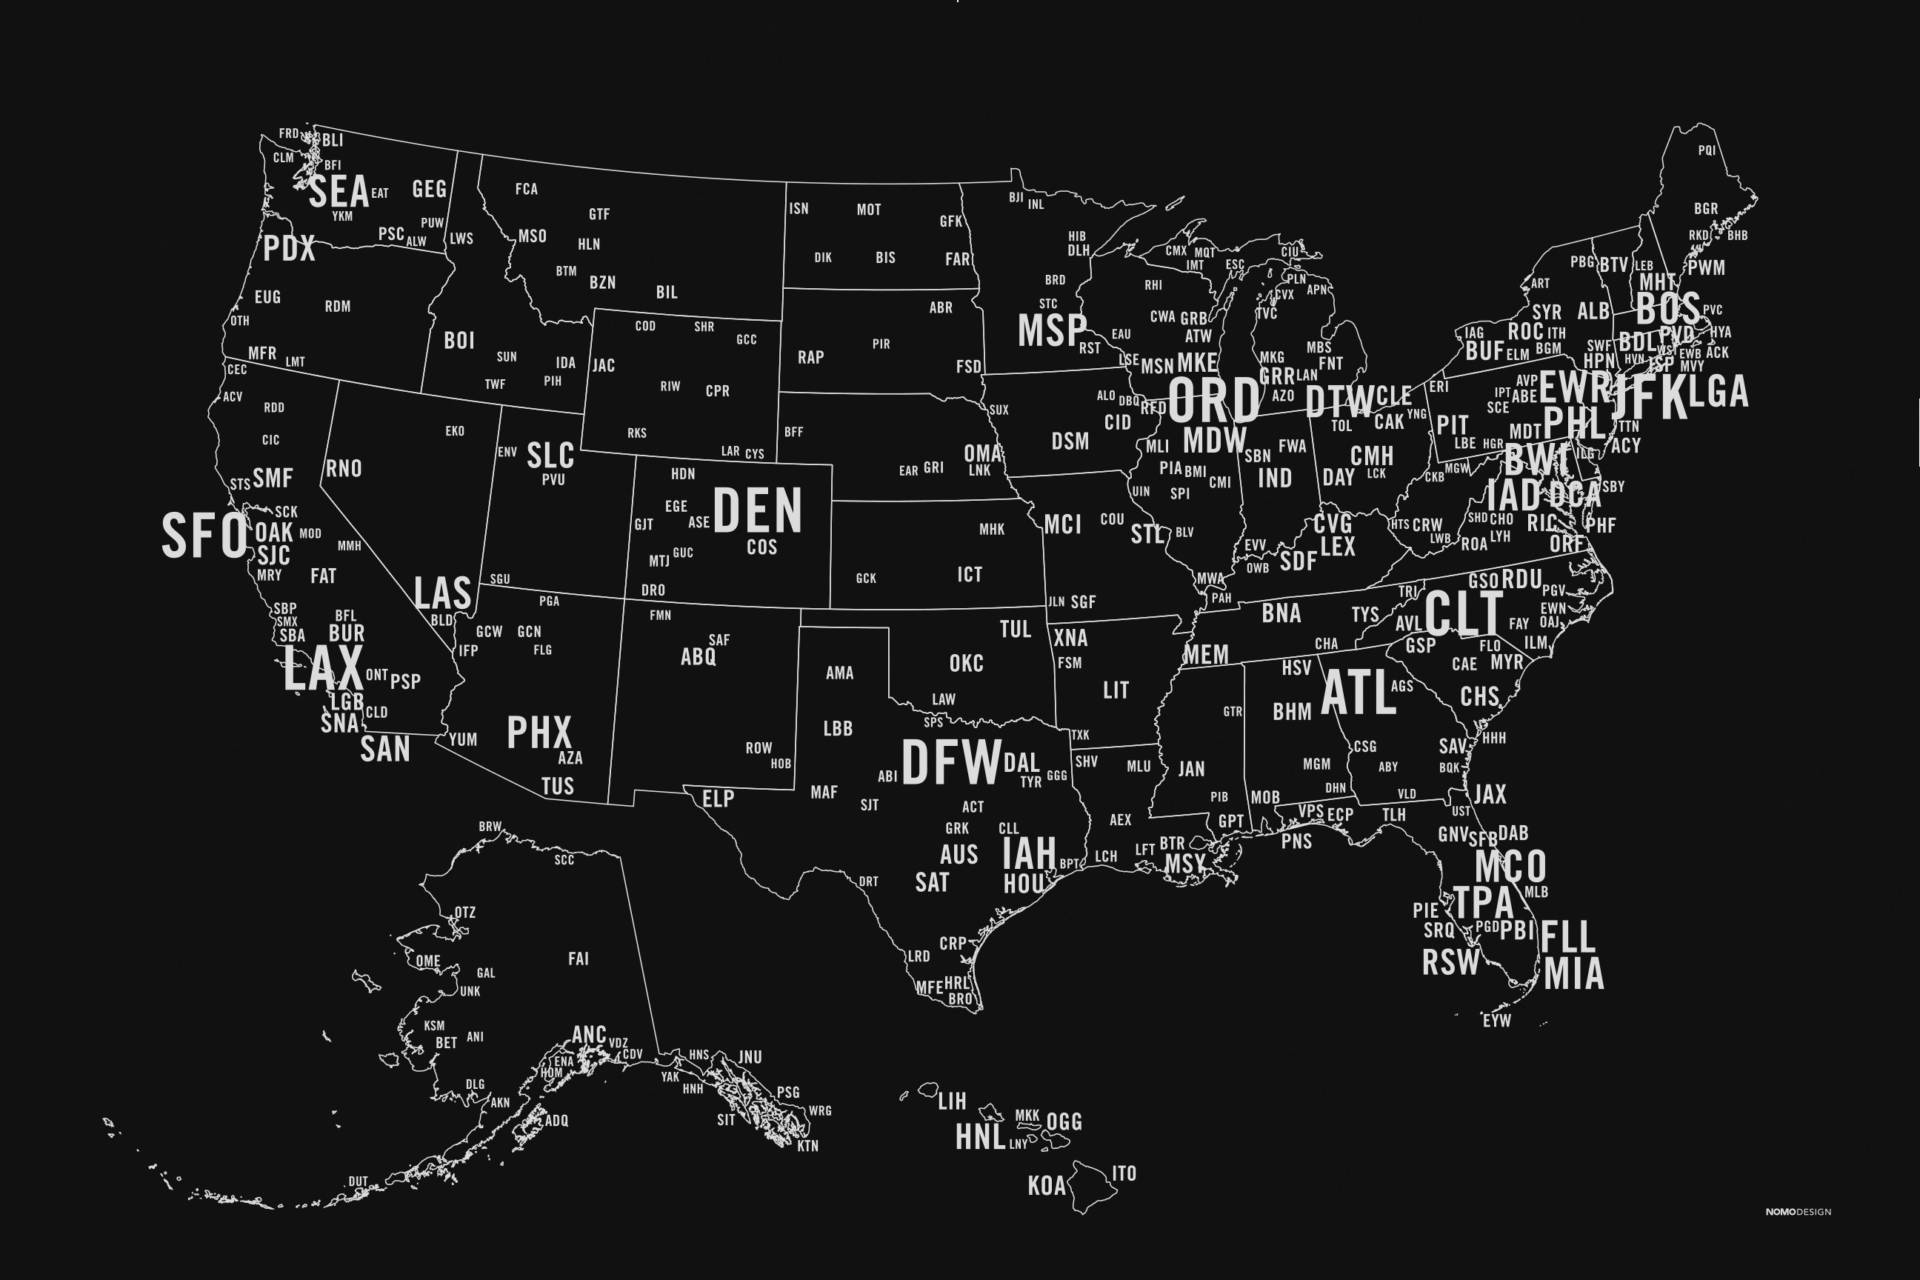 Nearly 400 airport codes from around the United States. Text size is based on their number of enplanements.  Designed by <a href="https://shop.nomodesign.com/collections/airport-runway-series/products/us-primary-airport-code-map-screen-print" target="_blank">NOMO</a>